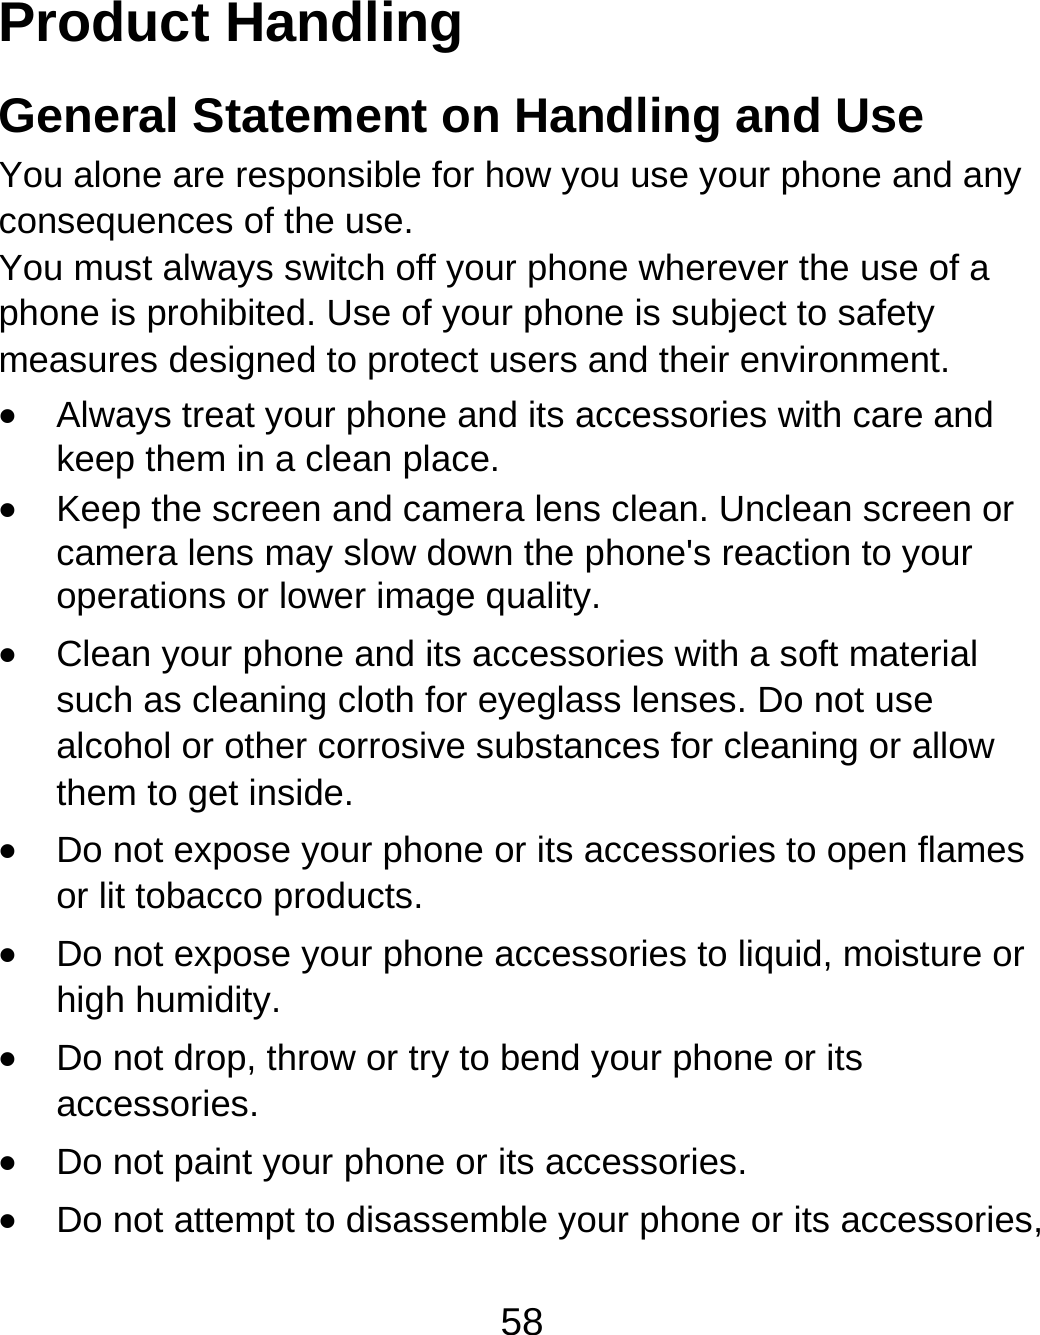 58 Product Handling General Statement on Handling and Use You alone are responsible for how you use your phone and any consequences of the use. You must always switch off your phone wherever the use of a phone is prohibited. Use of your phone is subject to safety measures designed to protect users and their environment.  Always treat your phone and its accessories with care and keep them in a clean place.  Keep the screen and camera lens clean. Unclean screen or camera lens may slow down the phone&apos;s reaction to your operations or lower image quality.  Clean your phone and its accessories with a soft material such as cleaning cloth for eyeglass lenses. Do not use alcohol or other corrosive substances for cleaning or allow them to get inside.  Do not expose your phone or its accessories to open flames or lit tobacco products.  Do not expose your phone accessories to liquid, moisture or high humidity.  Do not drop, throw or try to bend your phone or its accessories.  Do not paint your phone or its accessories.  Do not attempt to disassemble your phone or its accessories, 